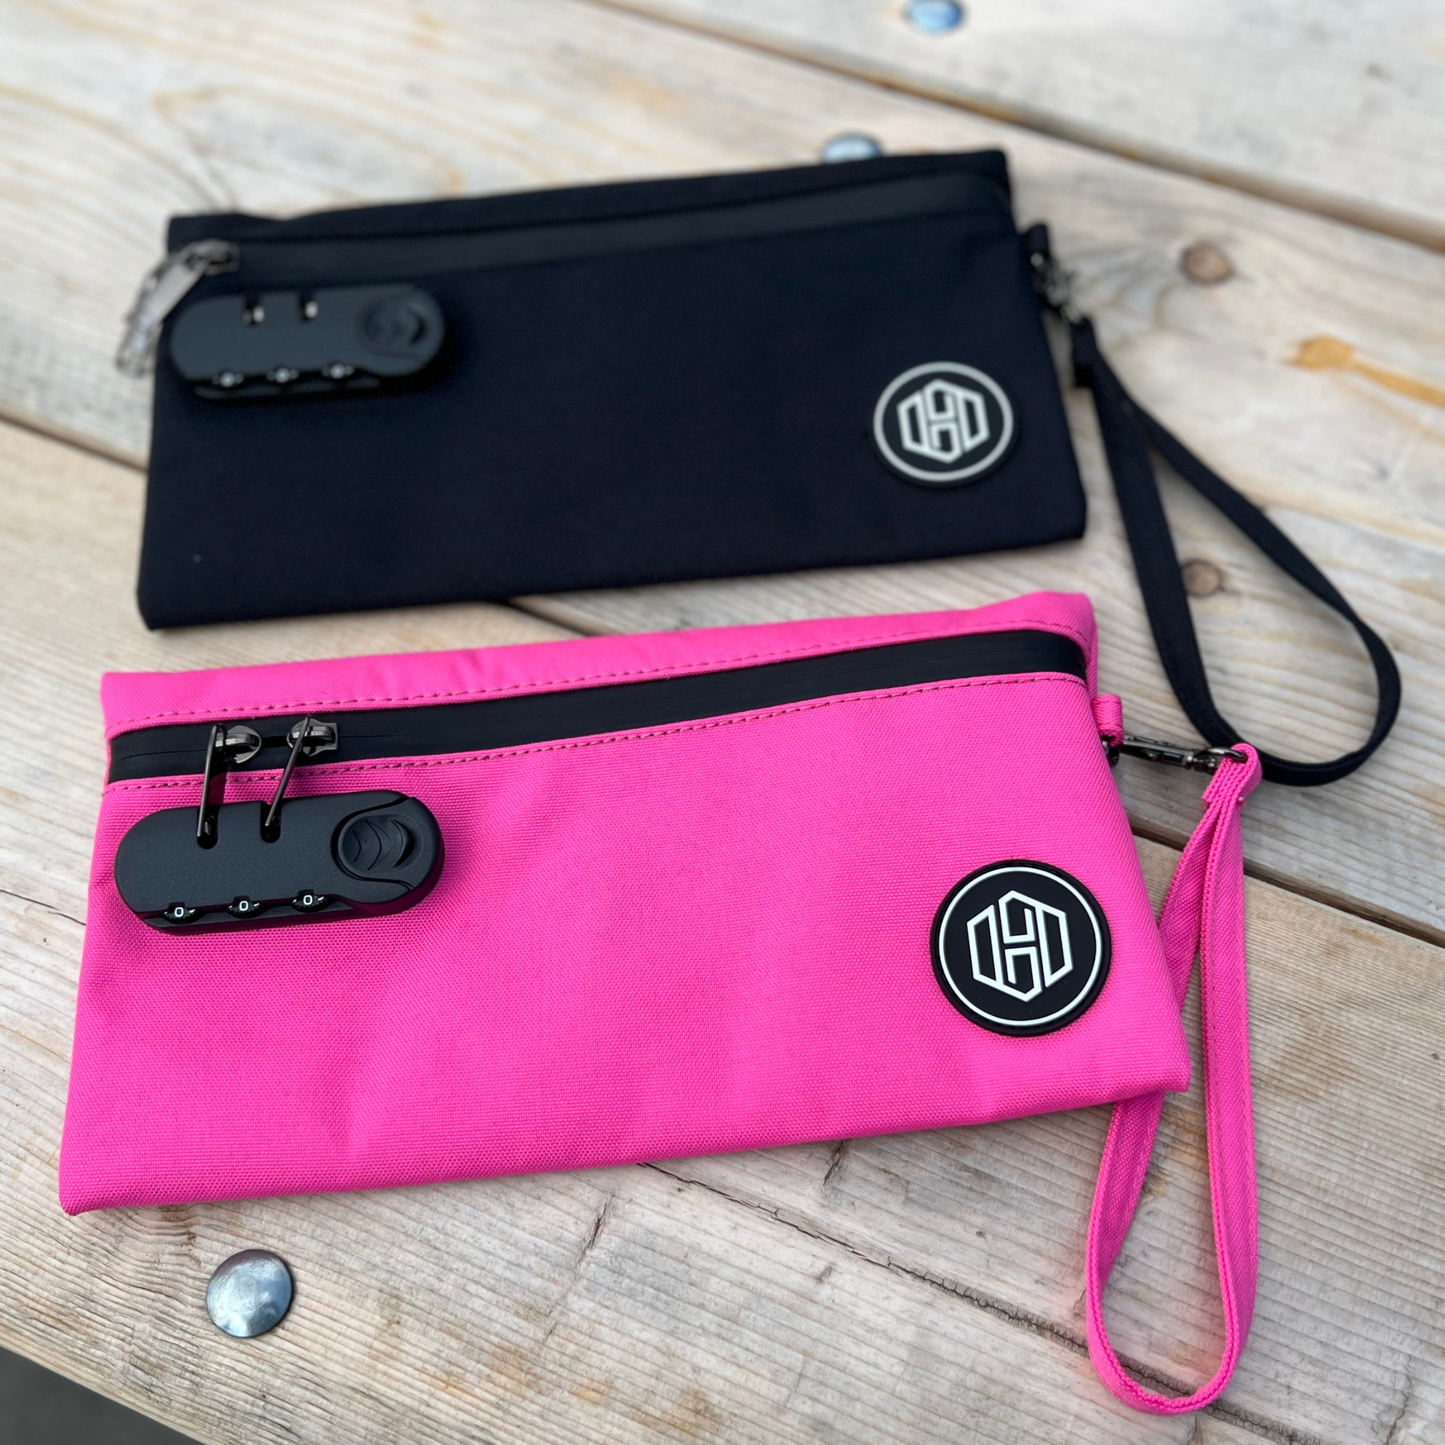 Smell Proof Clutch with Lock and Jar - Pink